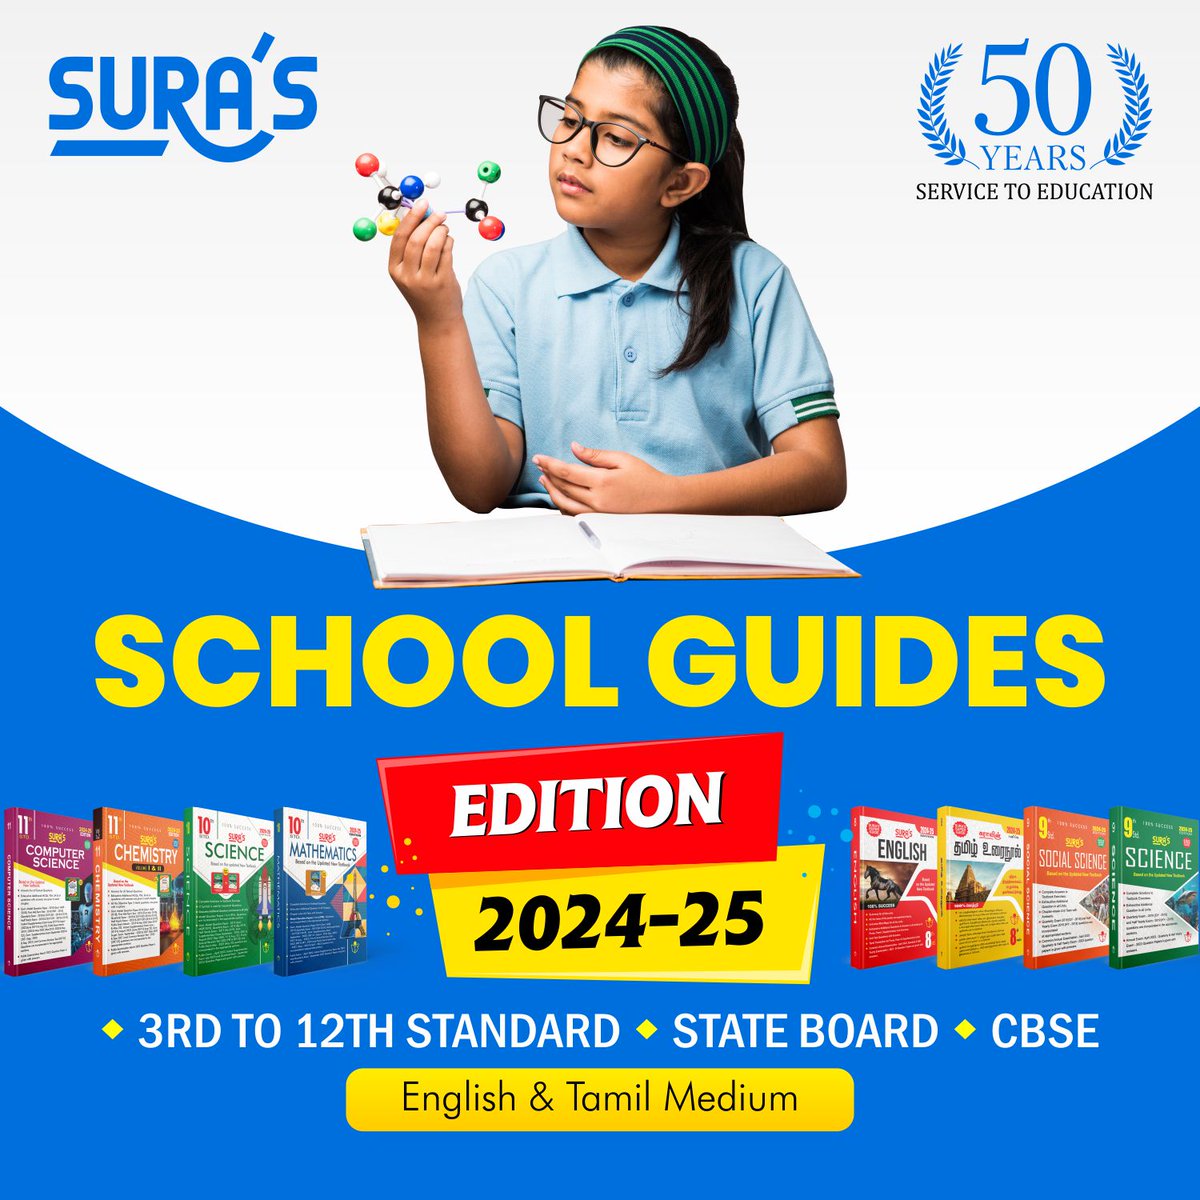 surabooks.com
Call 8124201000 / 8124301000 / 096001 75757
t.me/suraguides
#surabooks #suratests #suraguides #school #schoolguides #notes #guides #examguide #publicexam #examtable #12th #11th #10th #students #schoolstudents #education #tnstateboard #stateboard